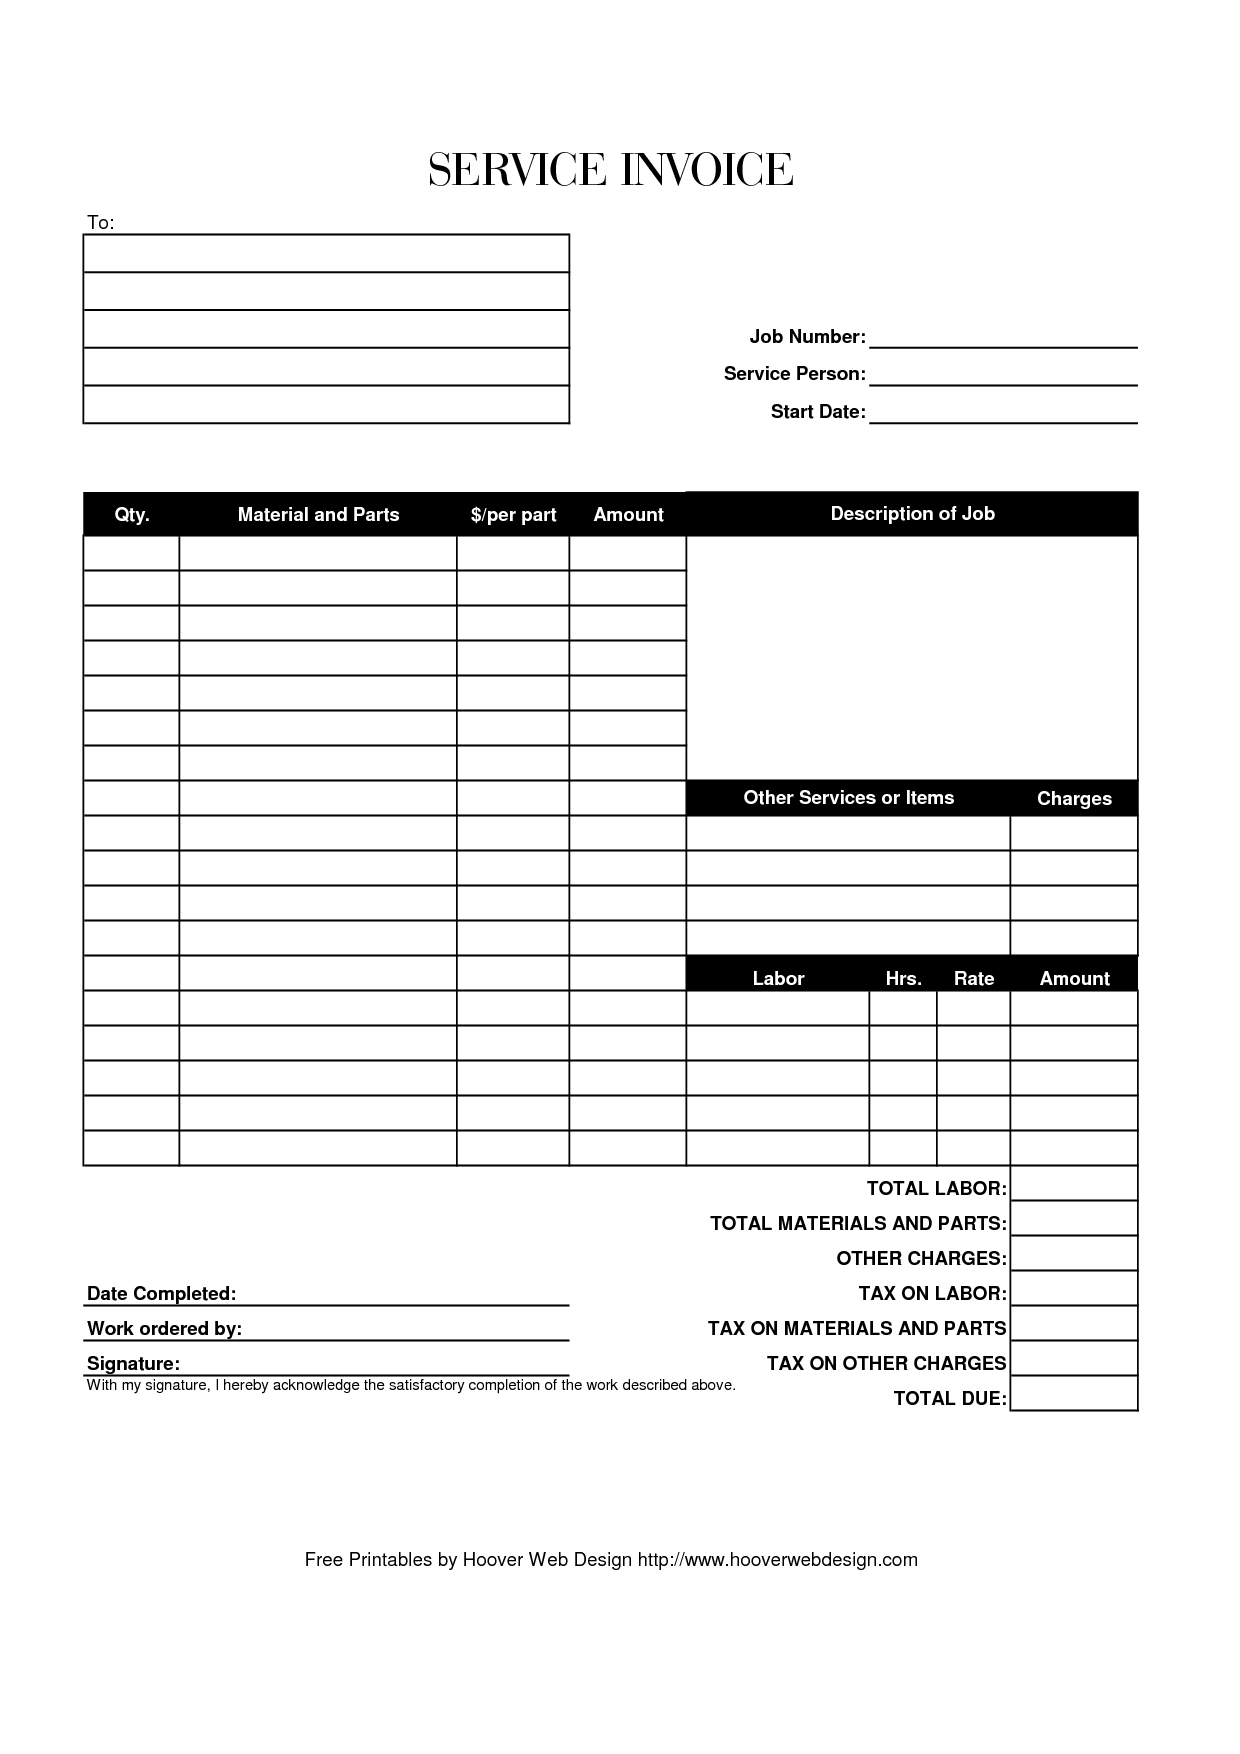 photo free printable invoice images blank invoice forms download free